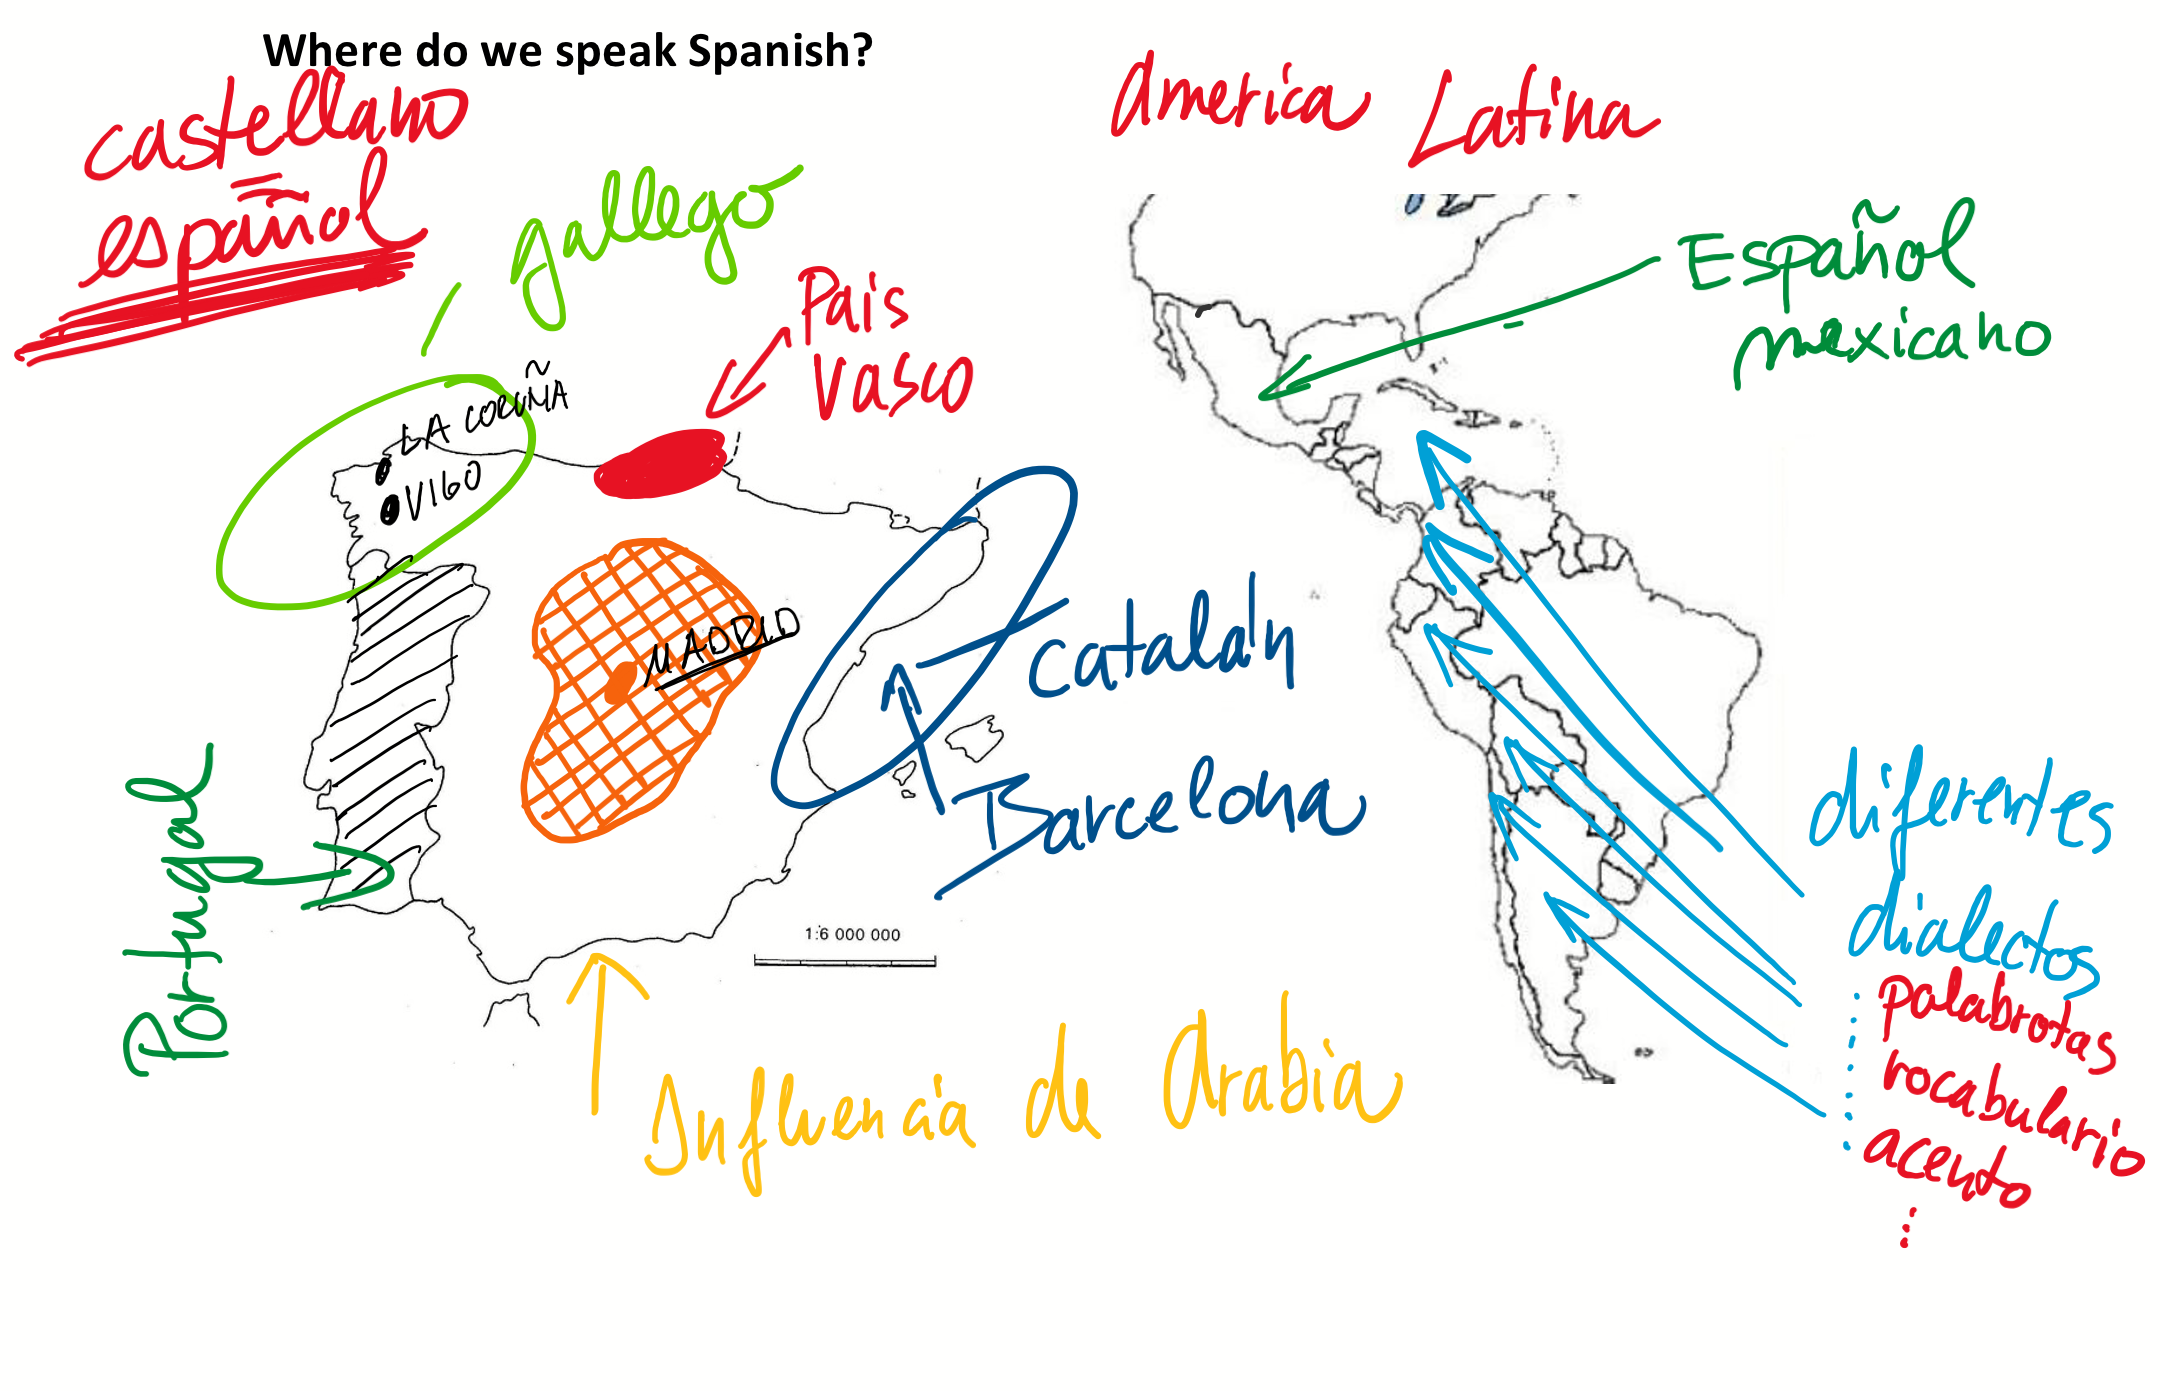 sample from an online Spanish lesson